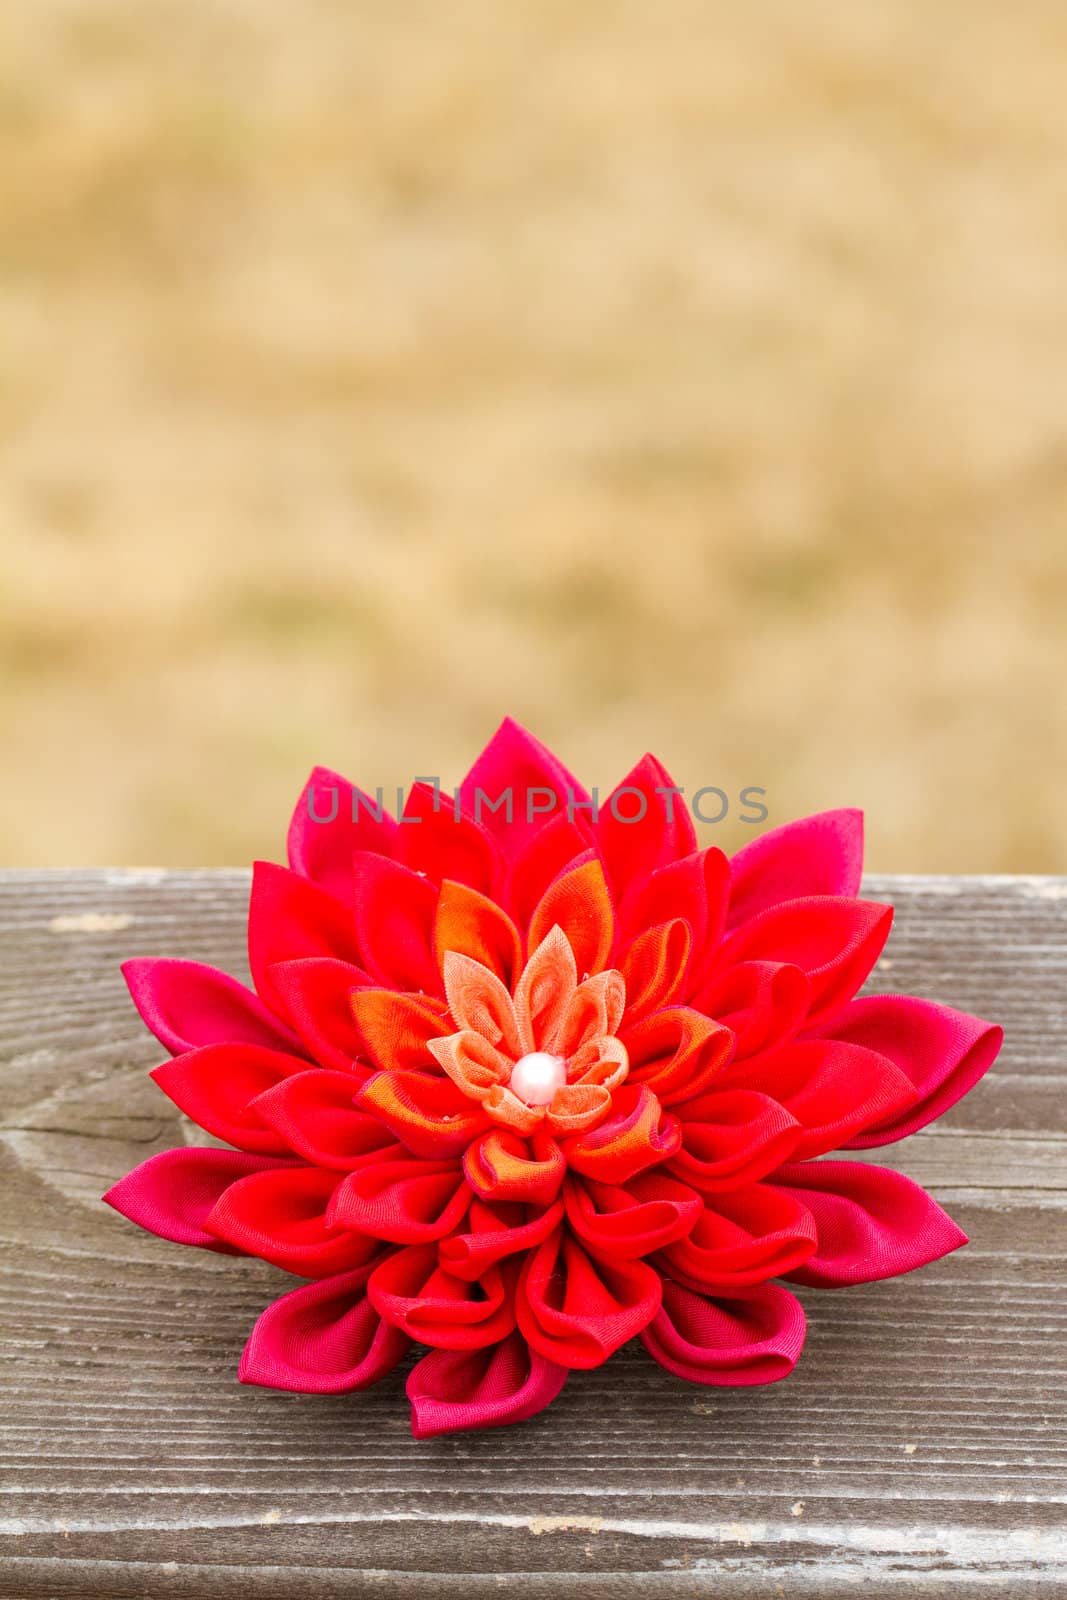 A bright red flower sewn from fabric at a wedding.